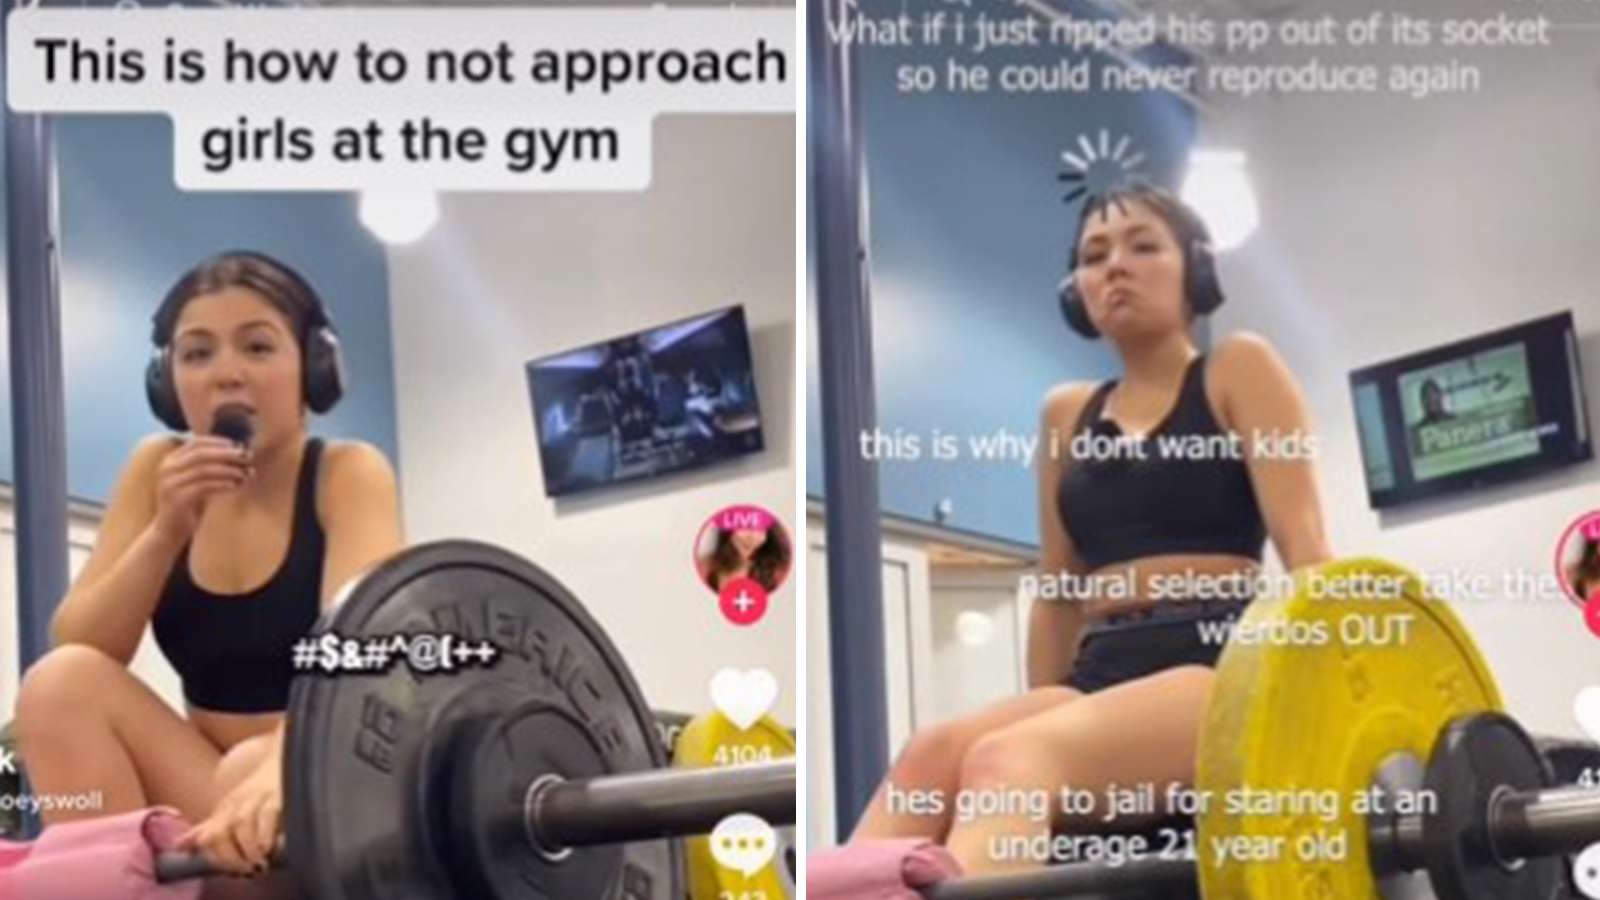 Jessica49 apologizes for viral gym video